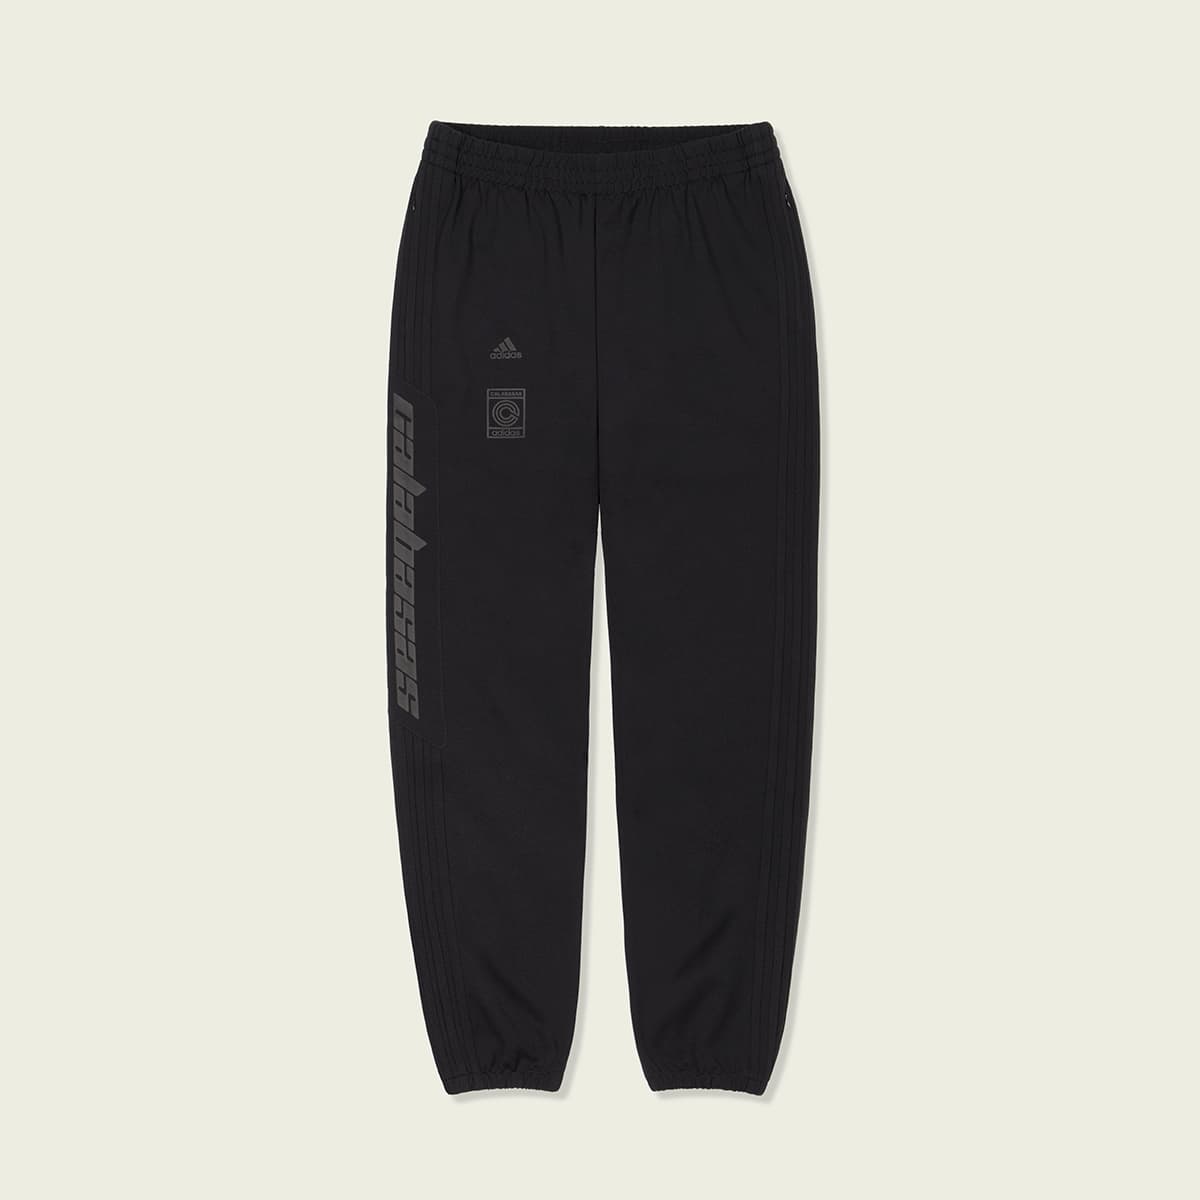 Yeezy Calabasas Track Pant - Register Now on END. Launches